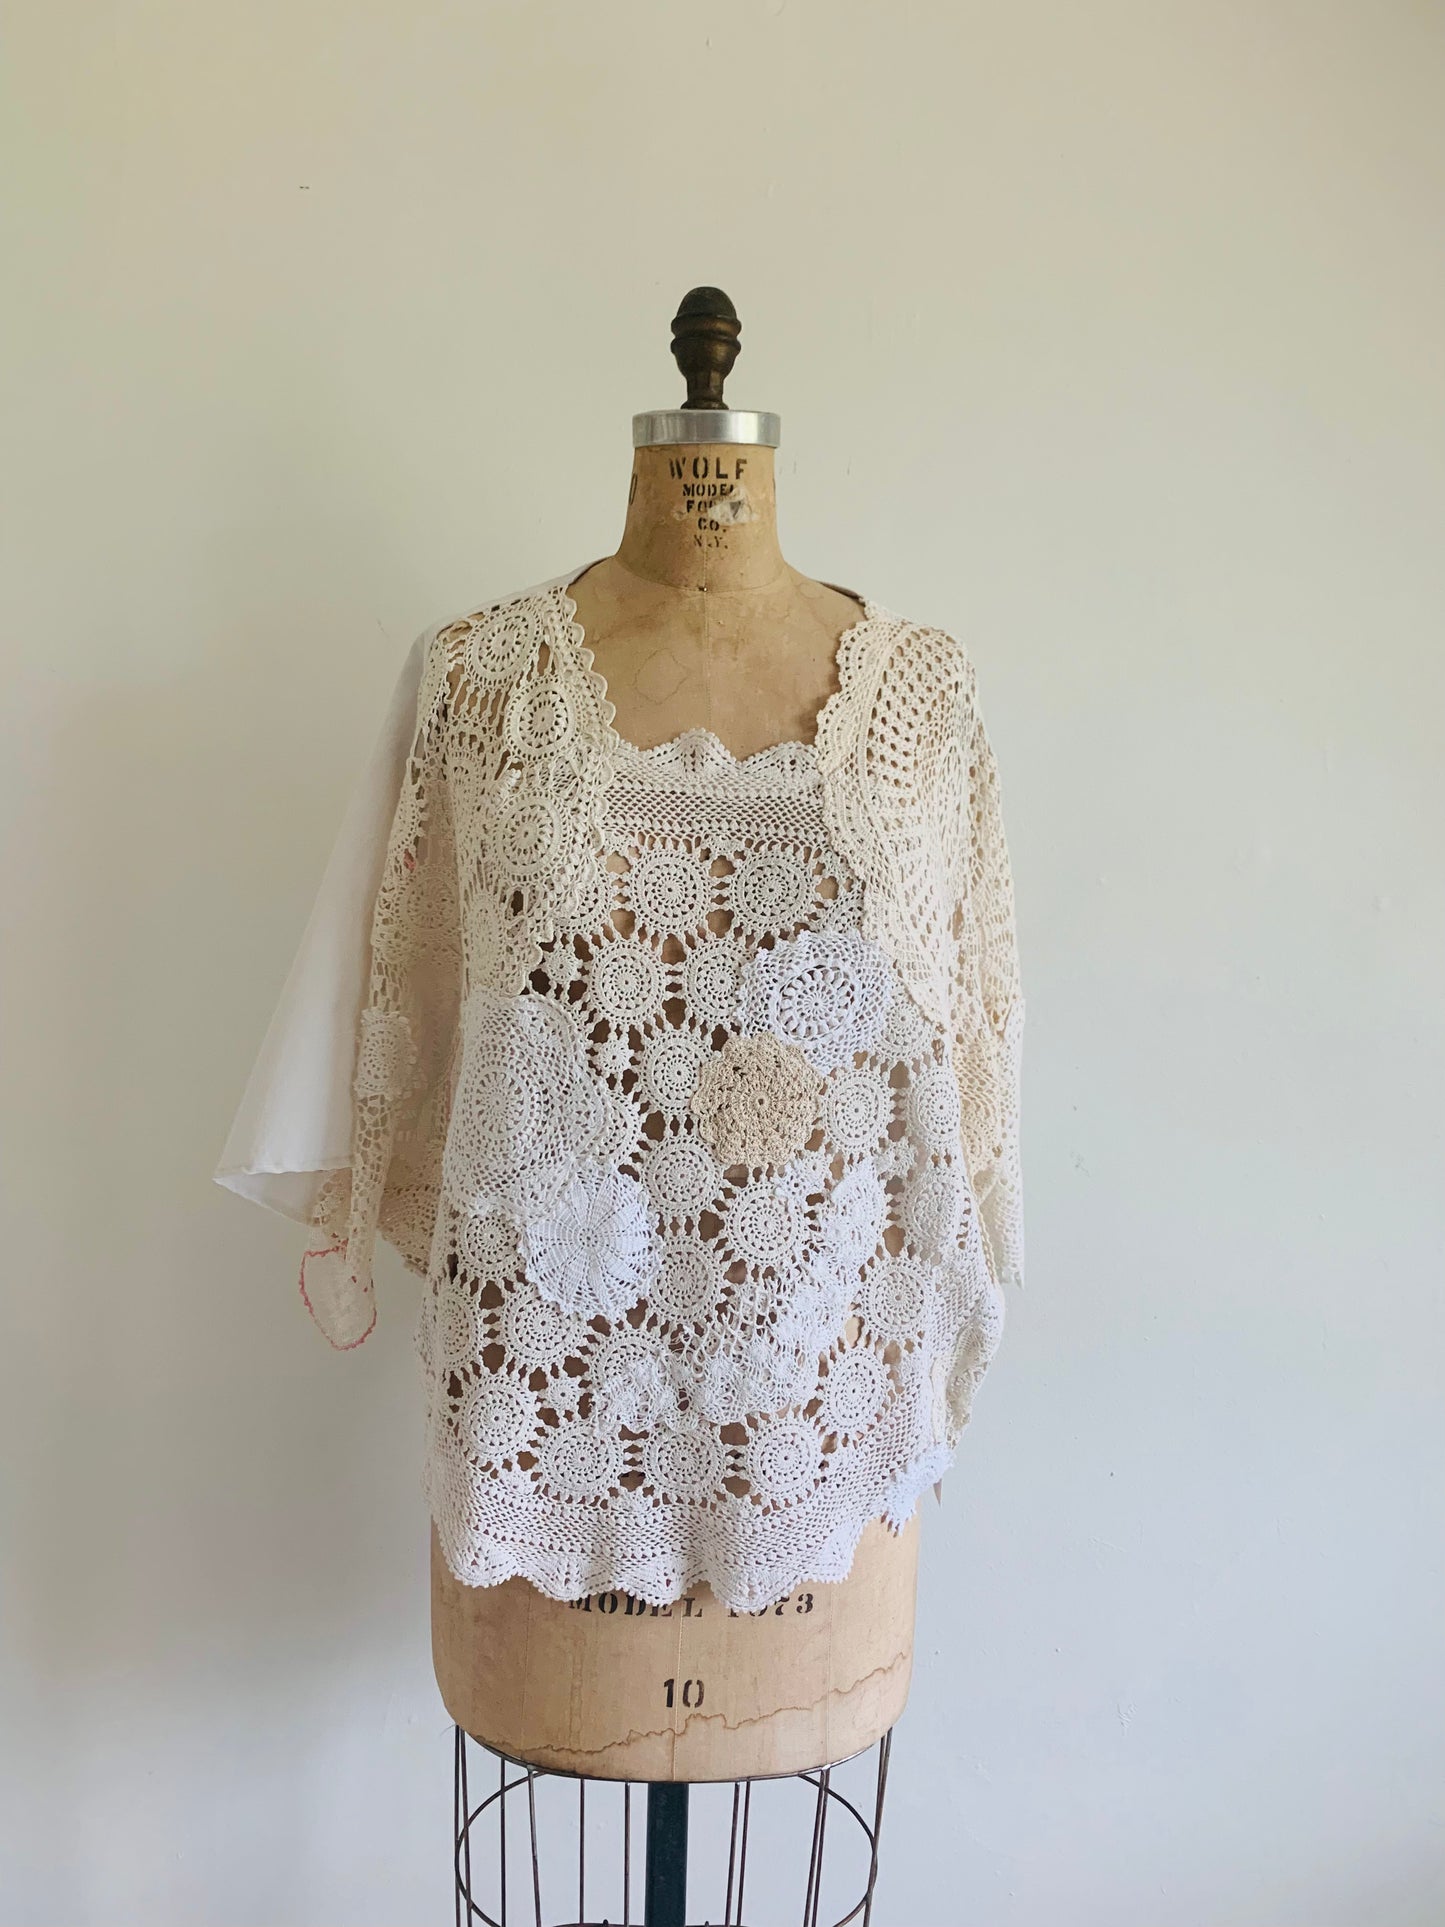 Vintage Crocheted Doily Square Necked Kym Top Size up to 2X #KYMC10